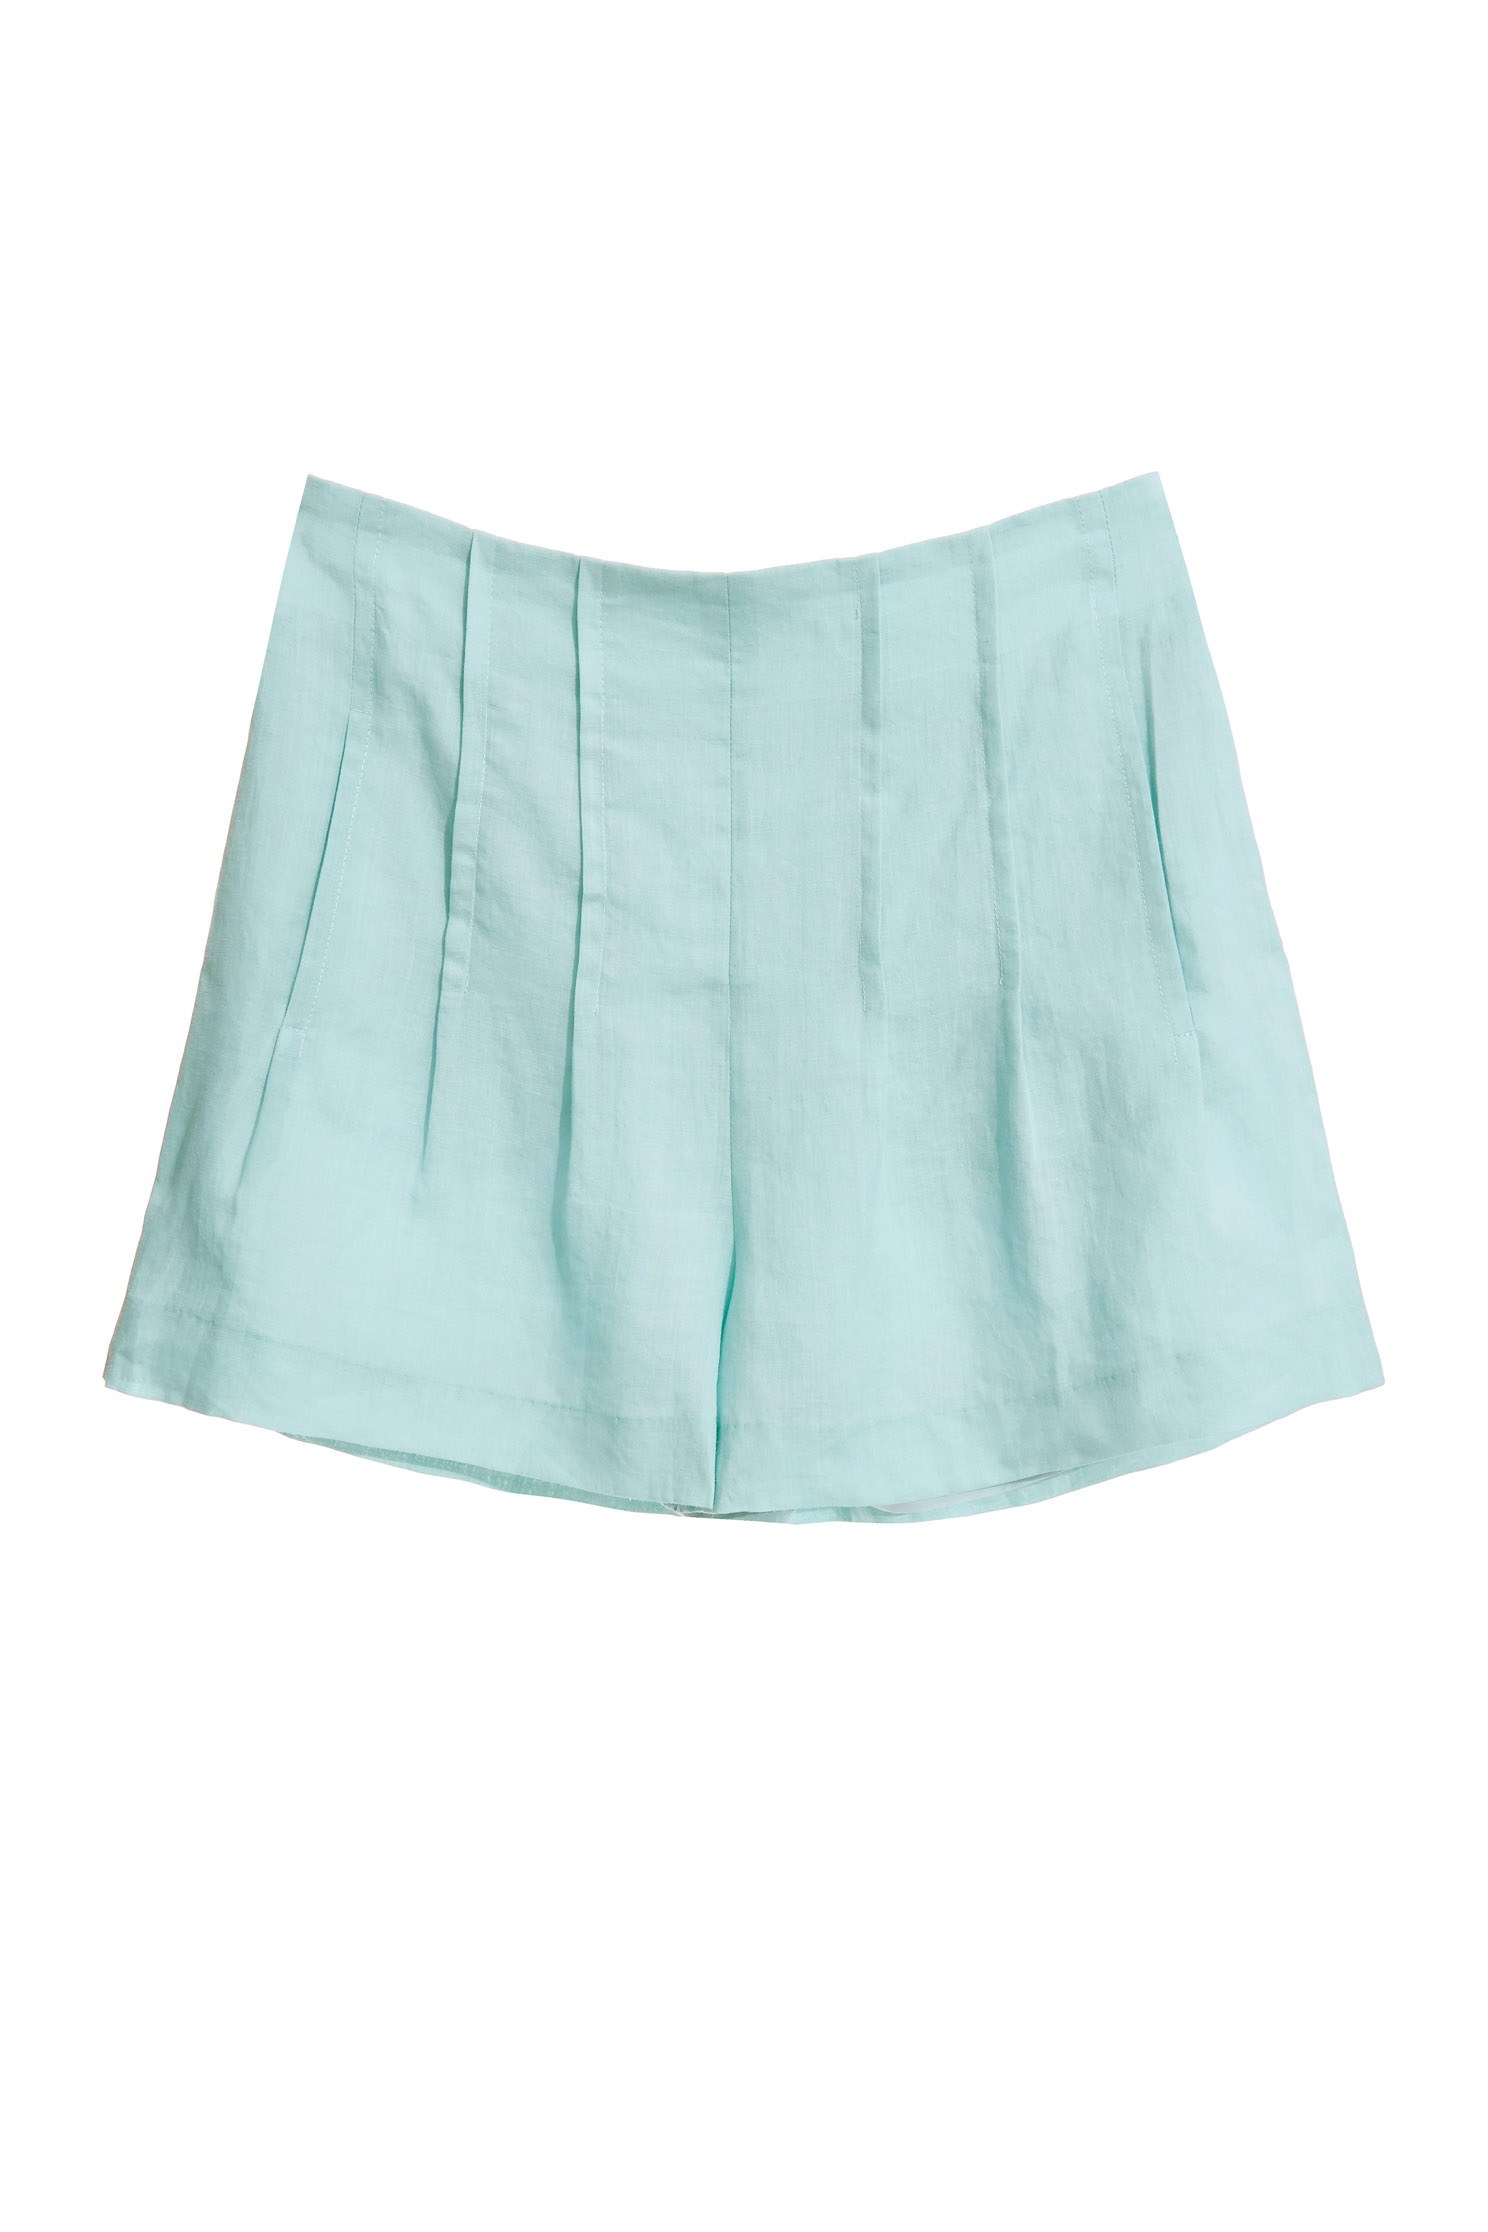 Darted wide-leg shorts with Cotton and linen,Season (SS) Look,coolsummer,healing colors,Shorts,staysafelife